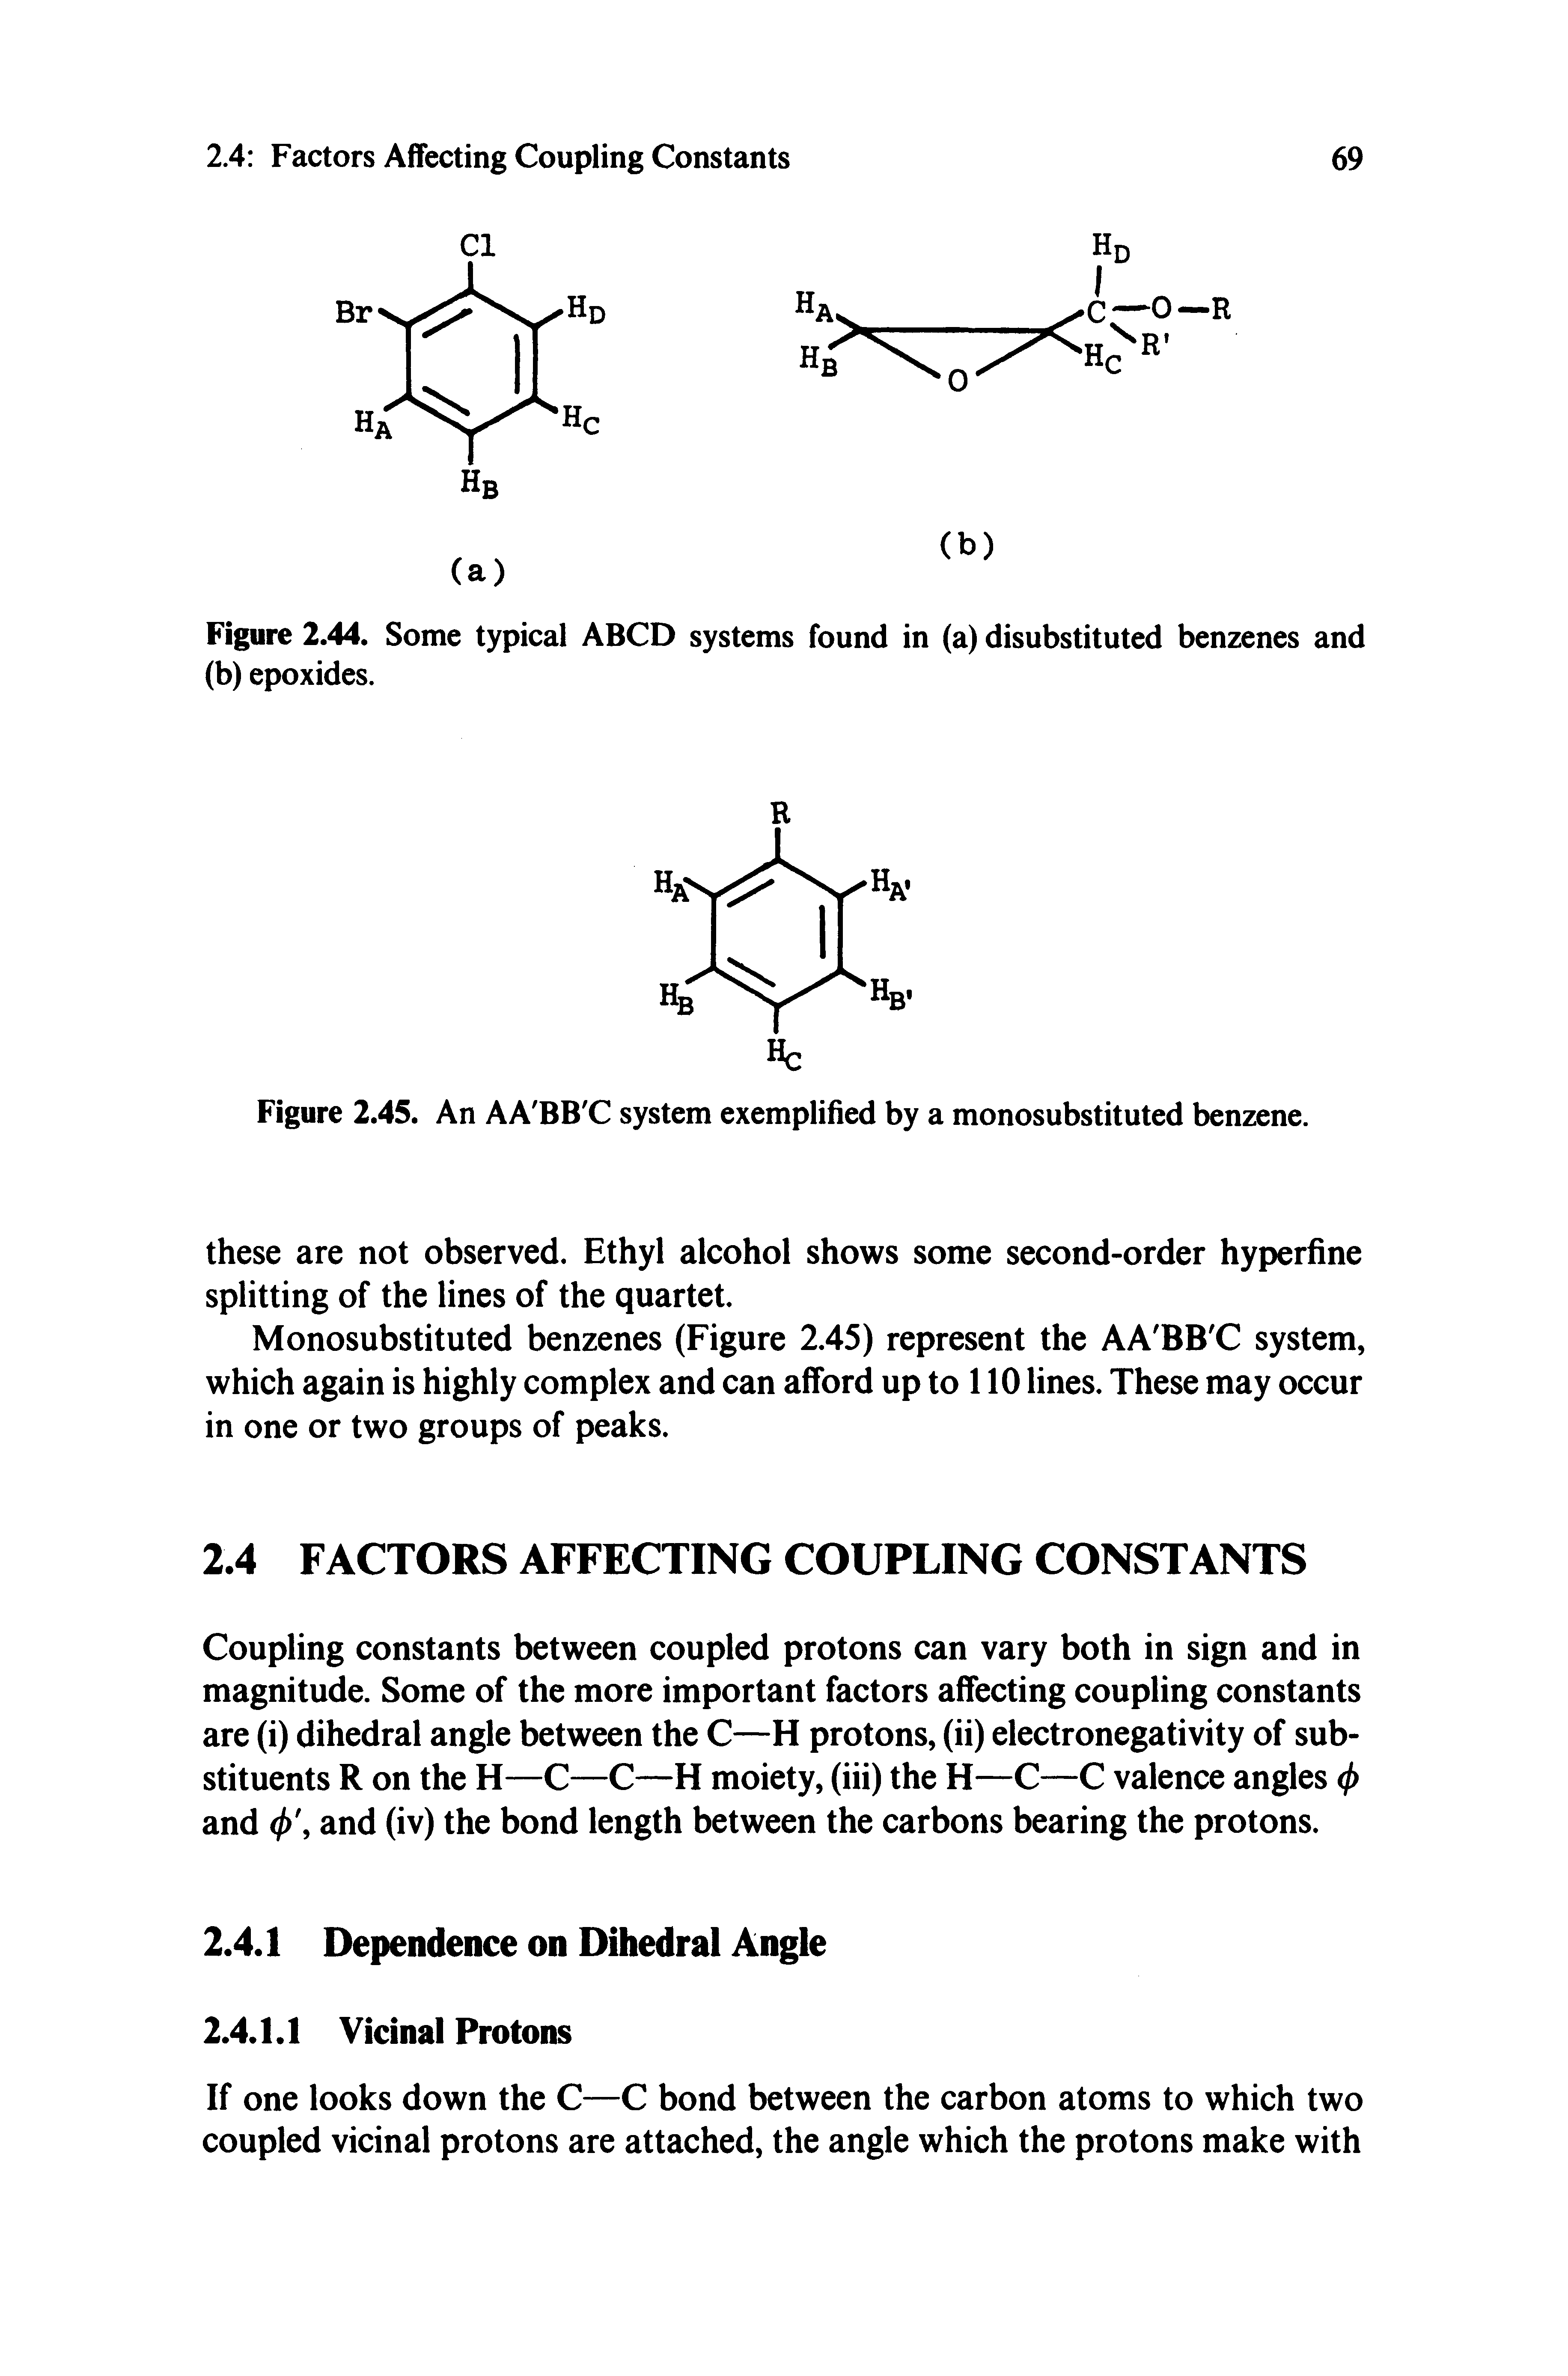 Figure 2.44. Some typical ABCD systems found in (a) disubstituted benzenes and (b) epoxides.